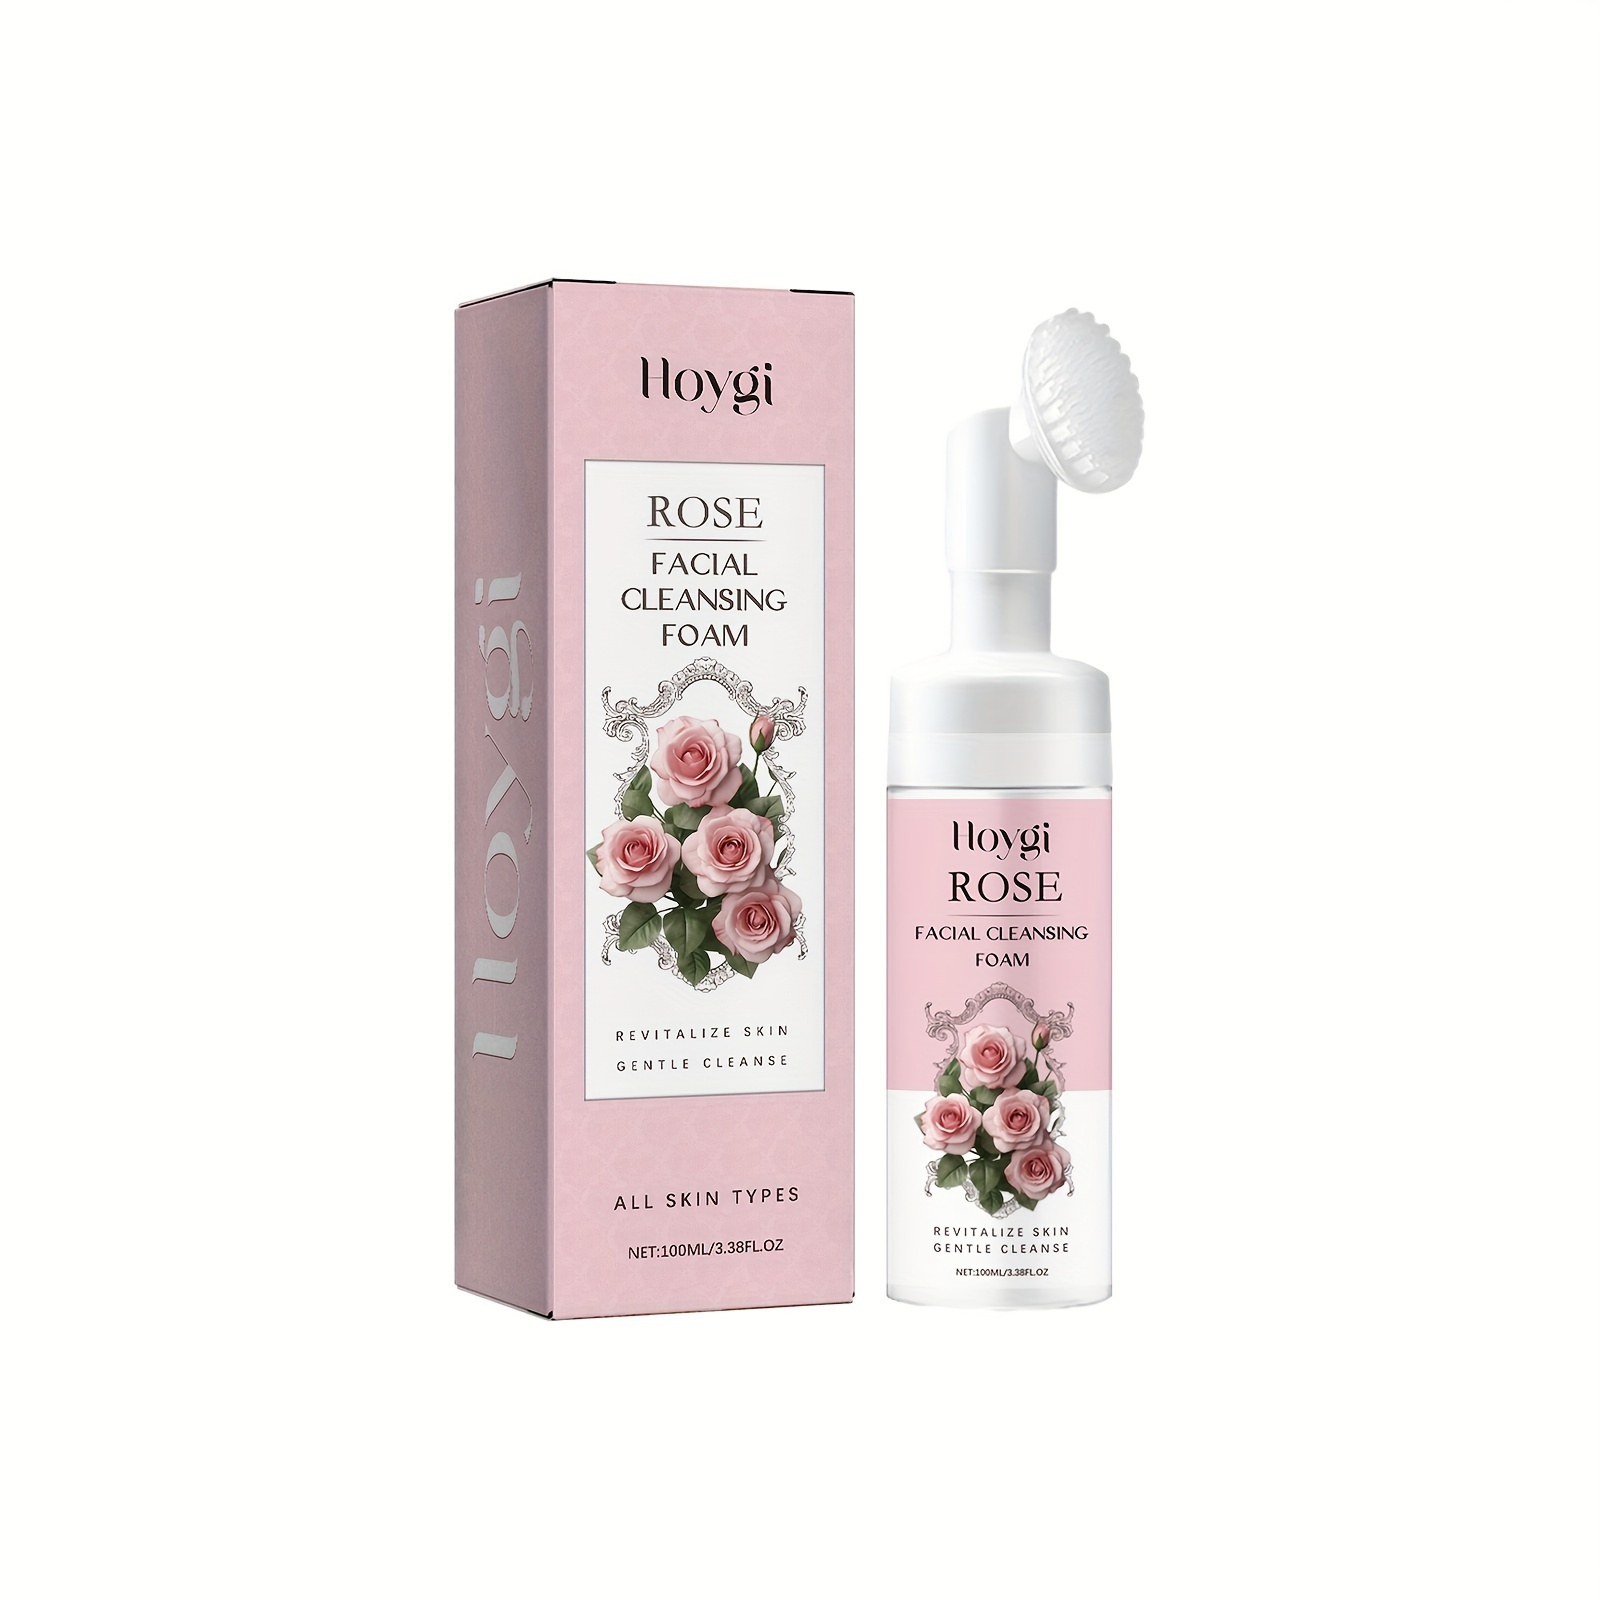 

100ml Rose Facial Cleansing Foam, Gentle Pore Cleansing, Hydrating & Nourishing Face Wash - 3.38 Fl.oz For All Skin Types